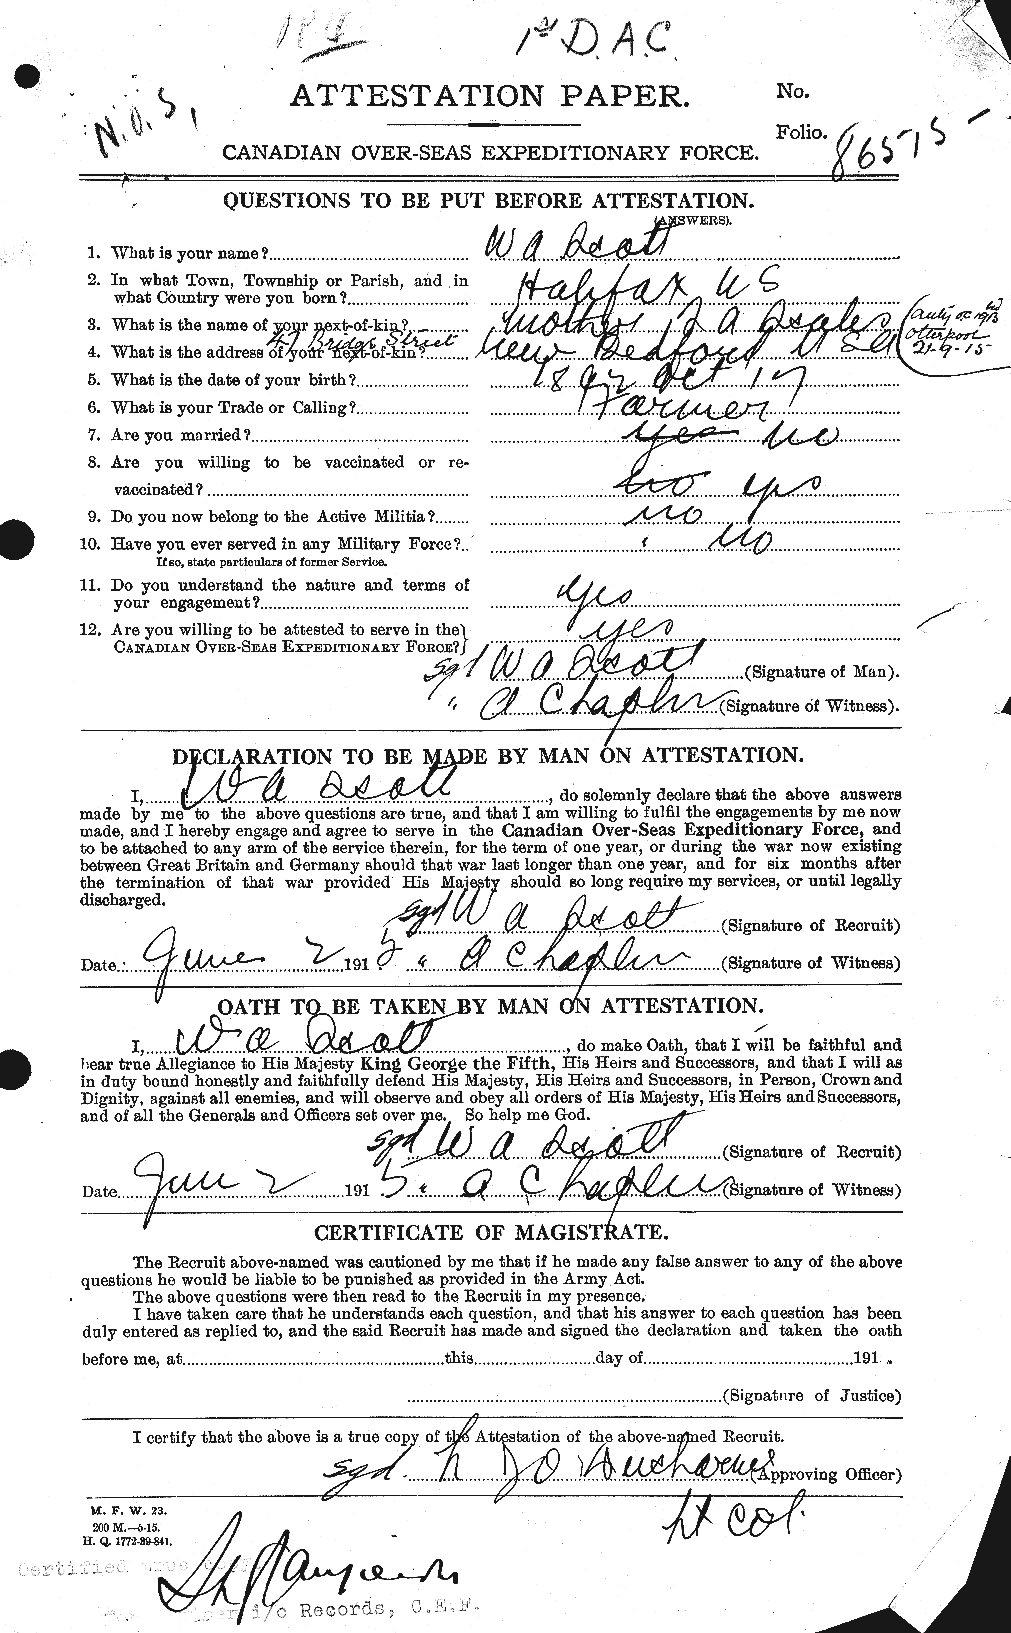 Personnel Records of the First World War - CEF 088198a